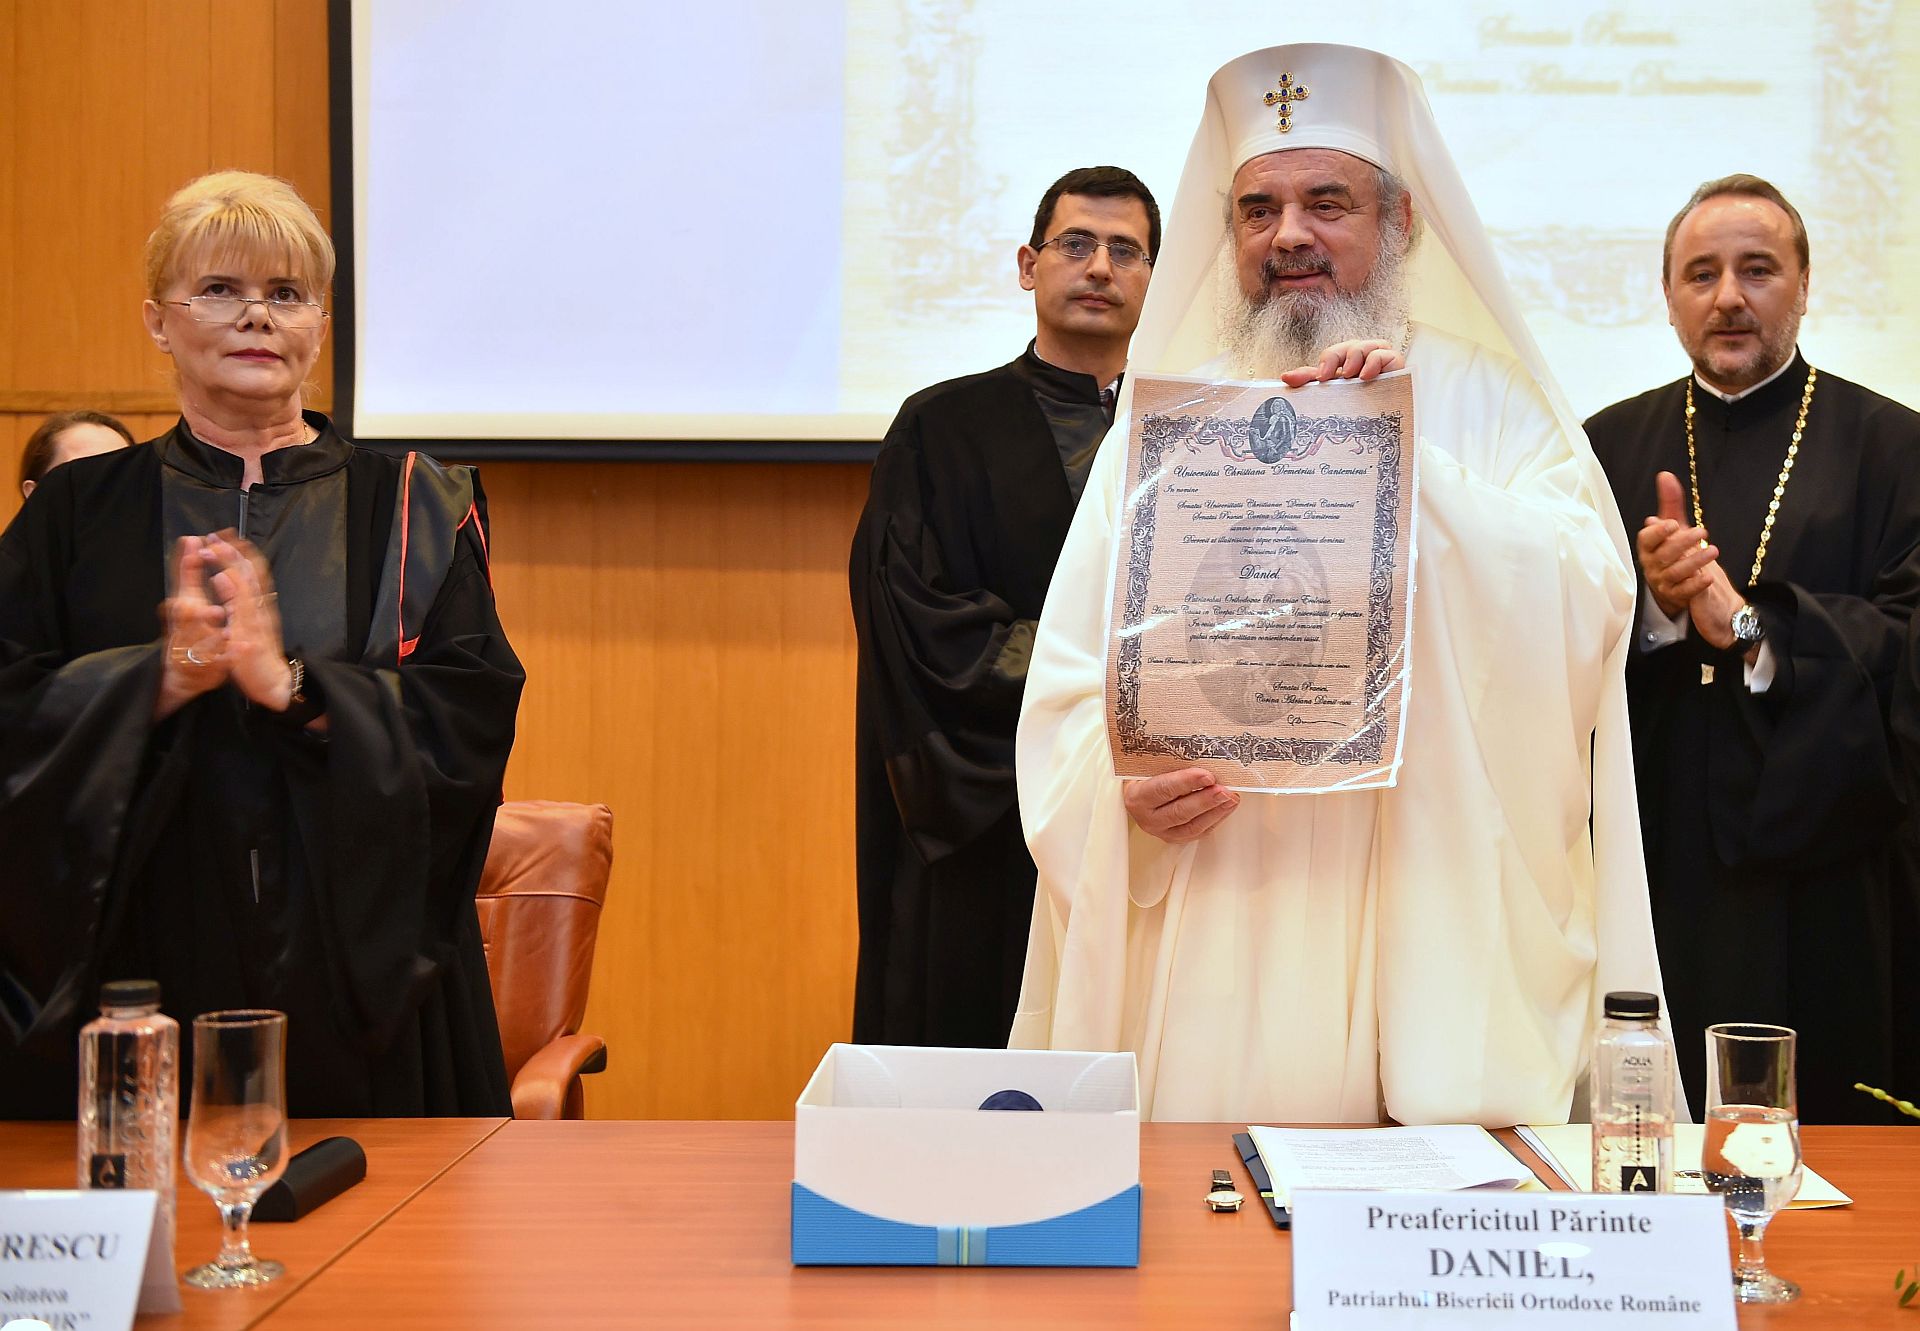 HB Patriarch Daniel of Romania received the Doctor Honoris Causa degree of the Dimitrie Cantemir University